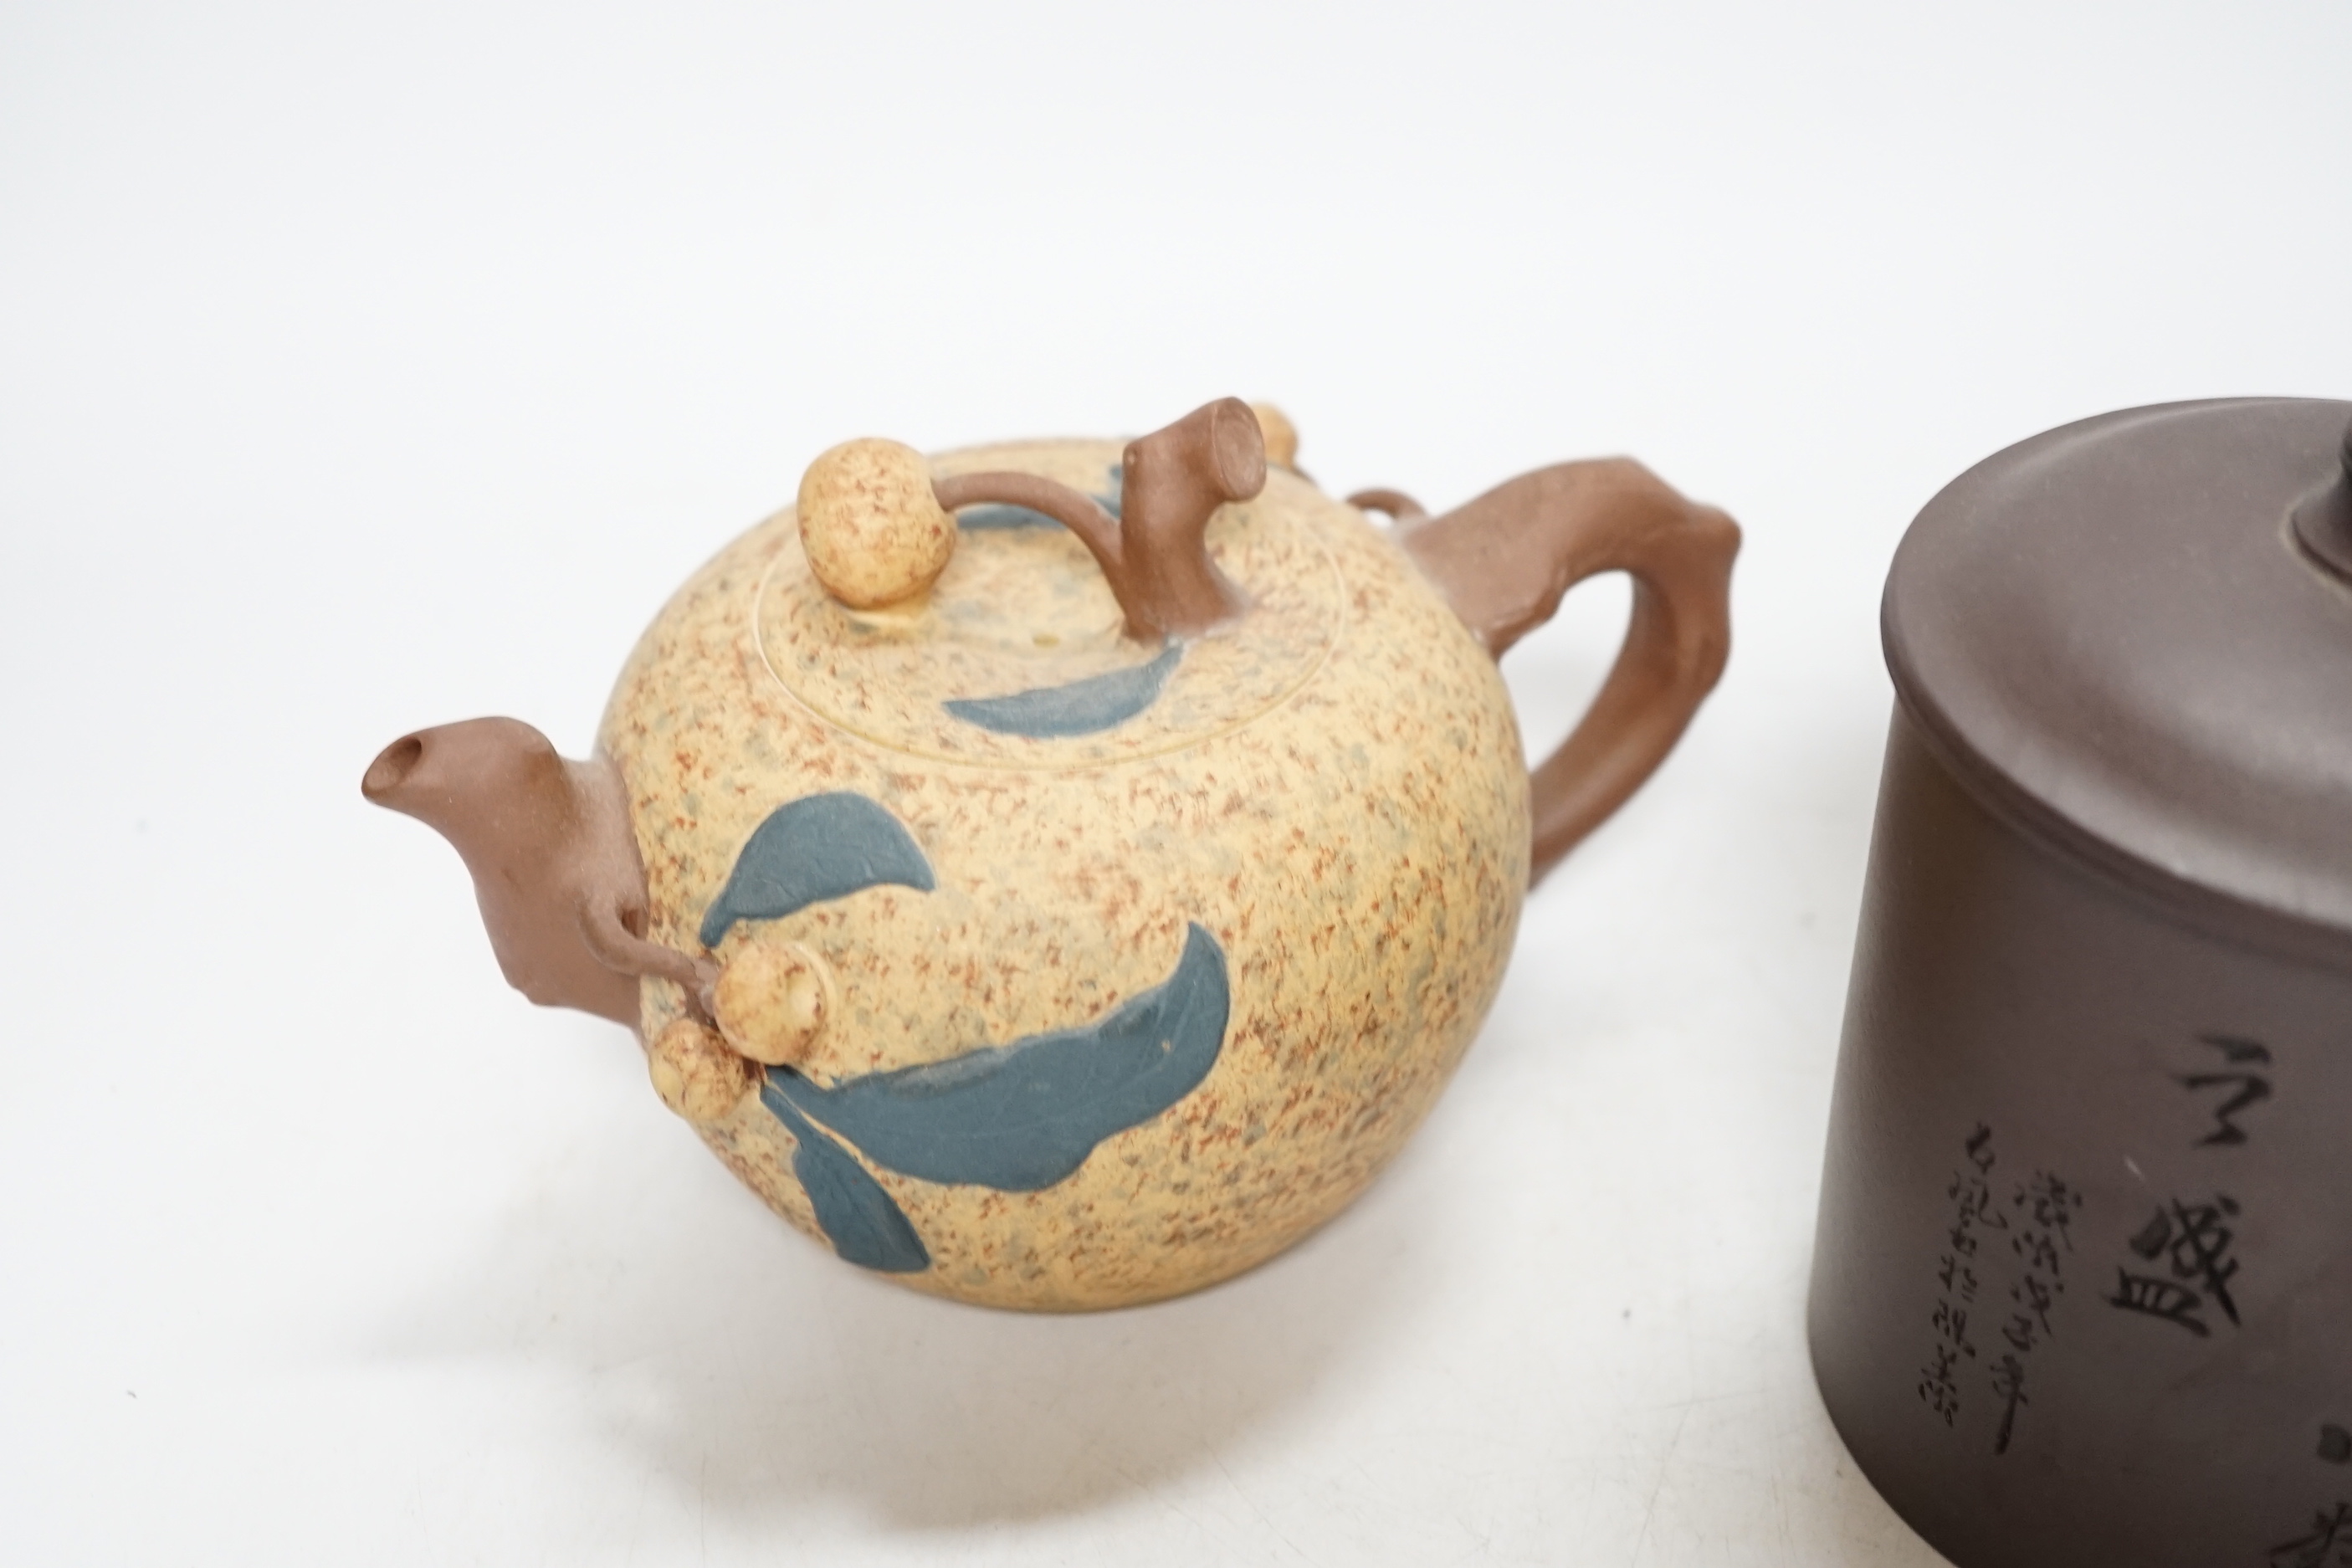 Two Chinese Yixing pottery teapots, one Republic period, tallest 12.5cm